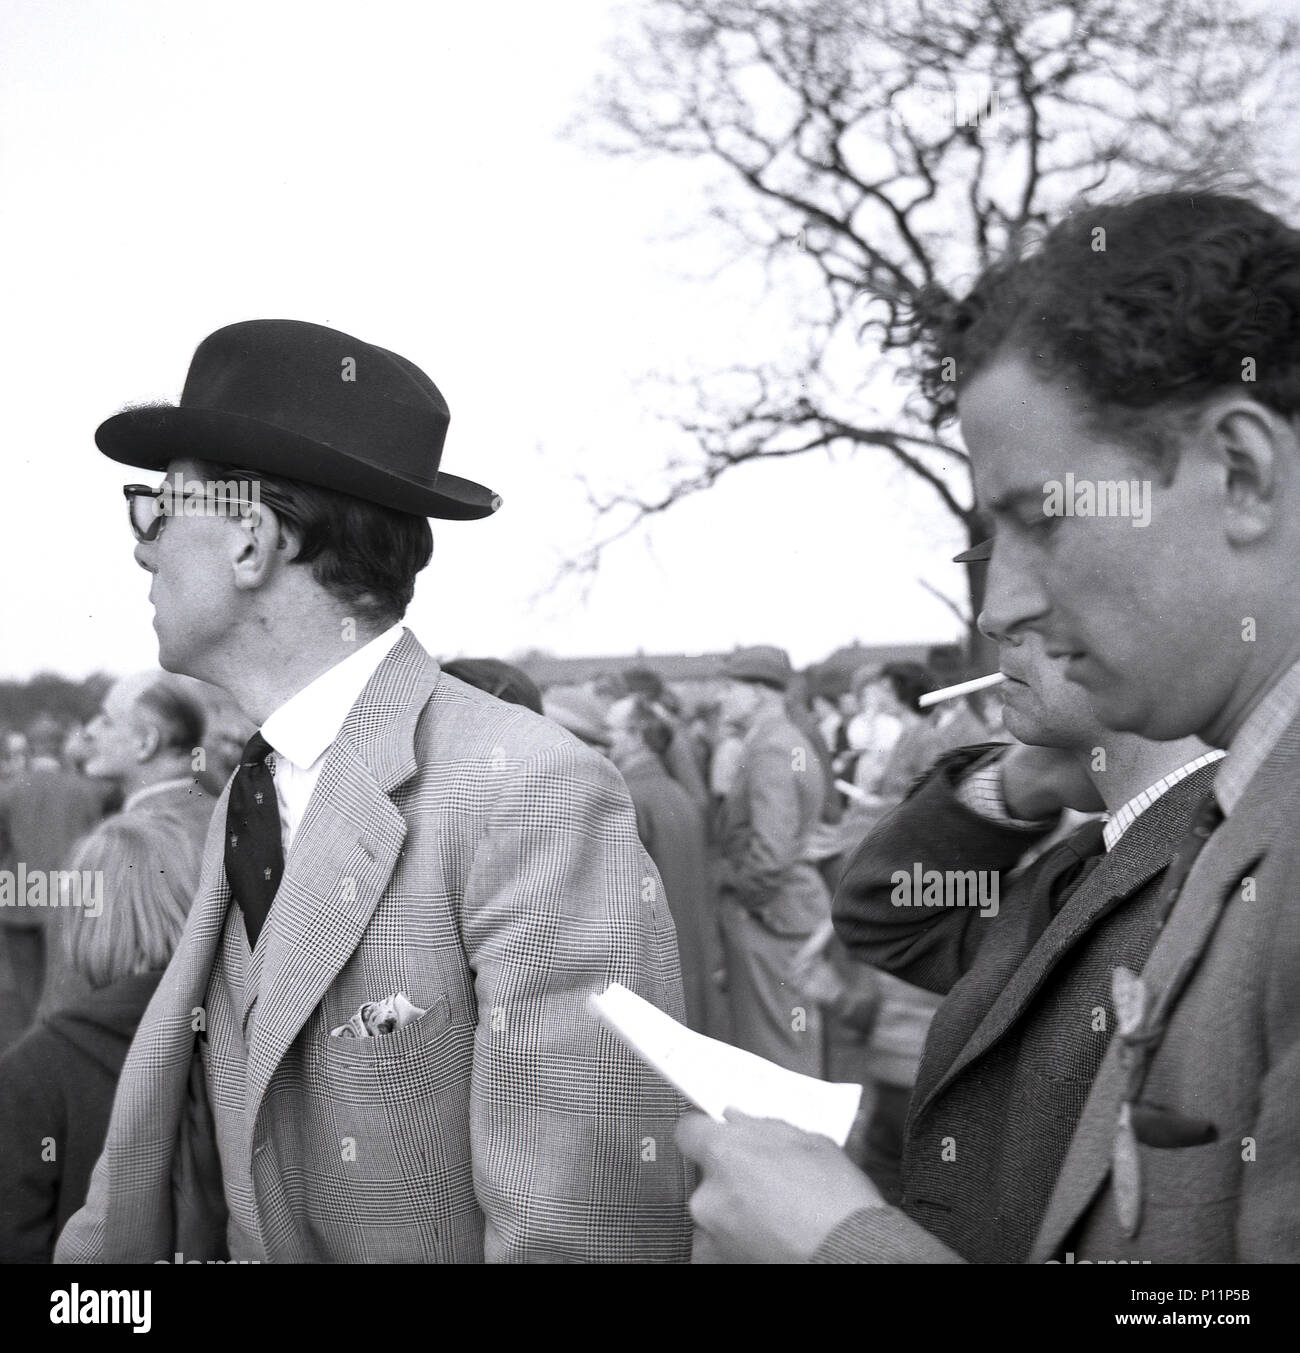 1958, May, well-dressed male race goers outside at a point-to-point amateur horse race meeting at Penshurst, Edenbridge, England, UK. Stock Photo